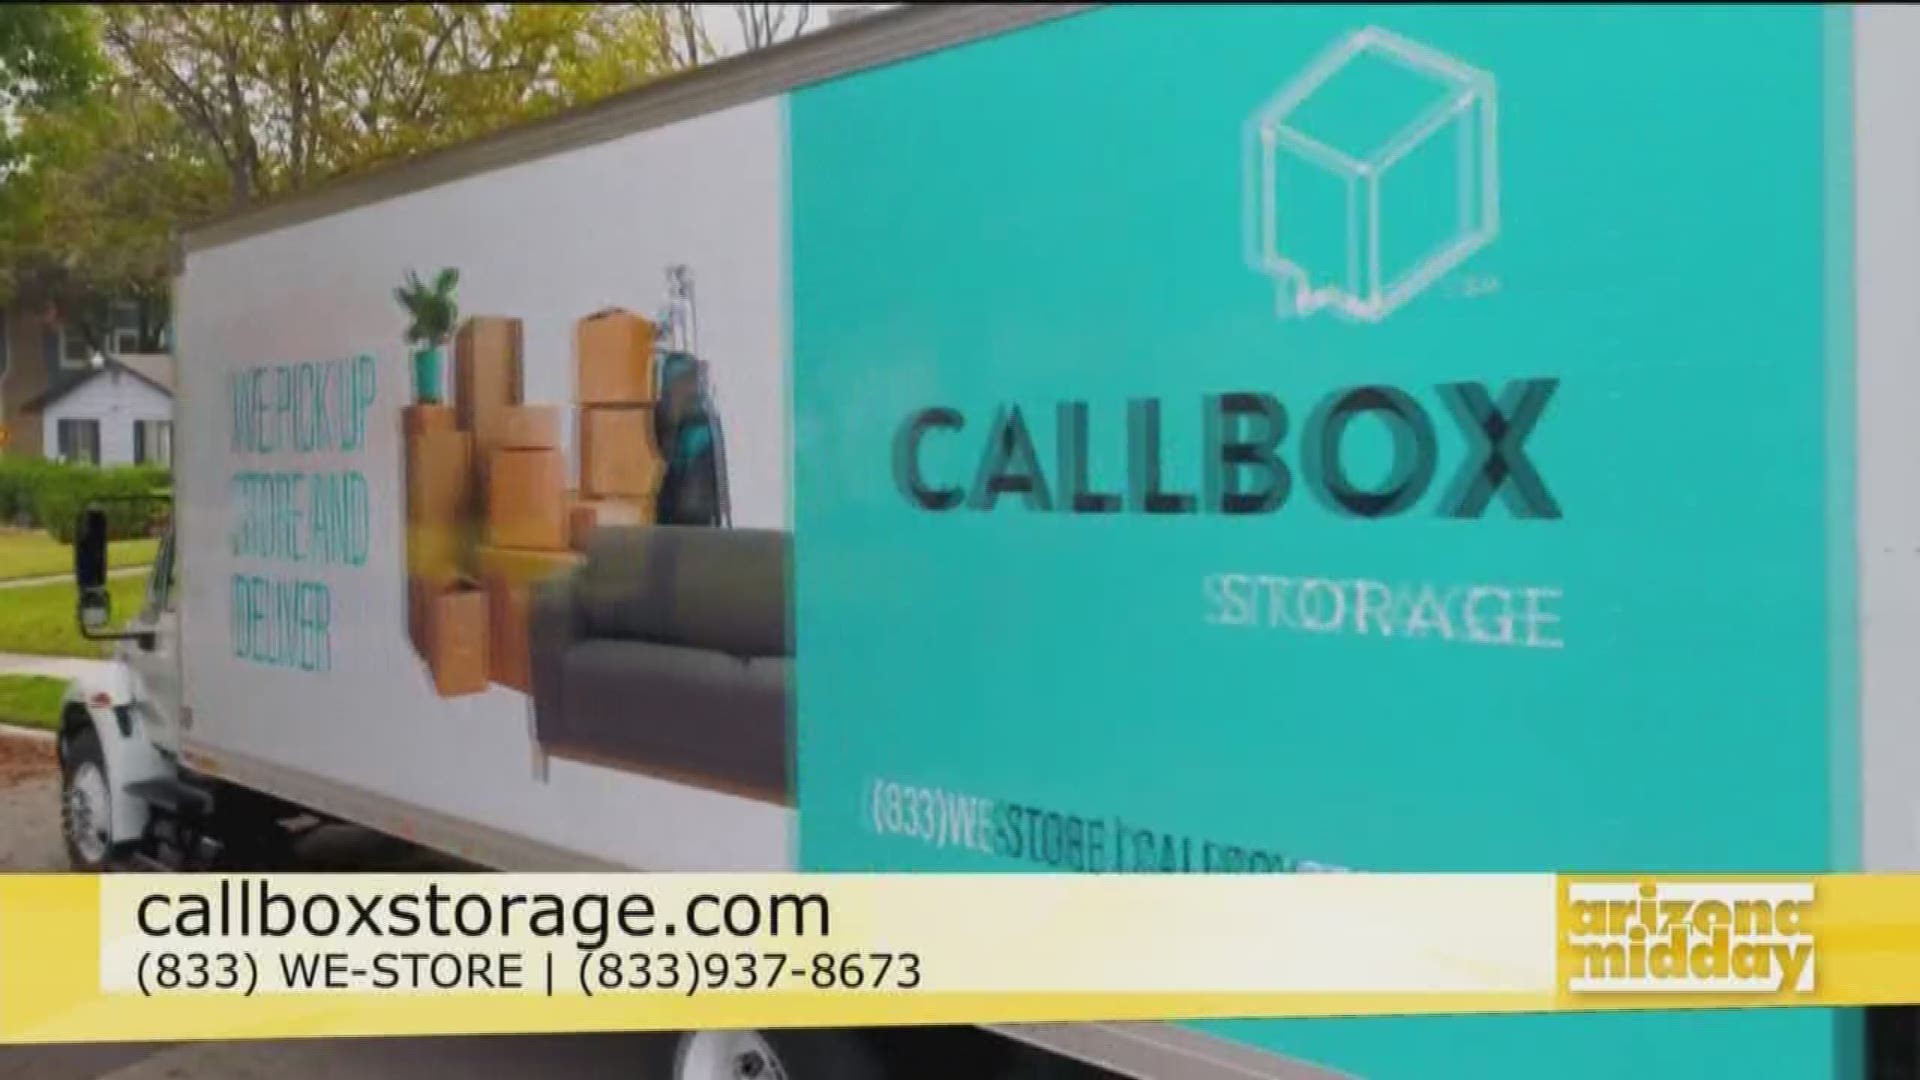 Kyle Bainter with Callbox Storage shares how they take away your troubles when packing away your things!